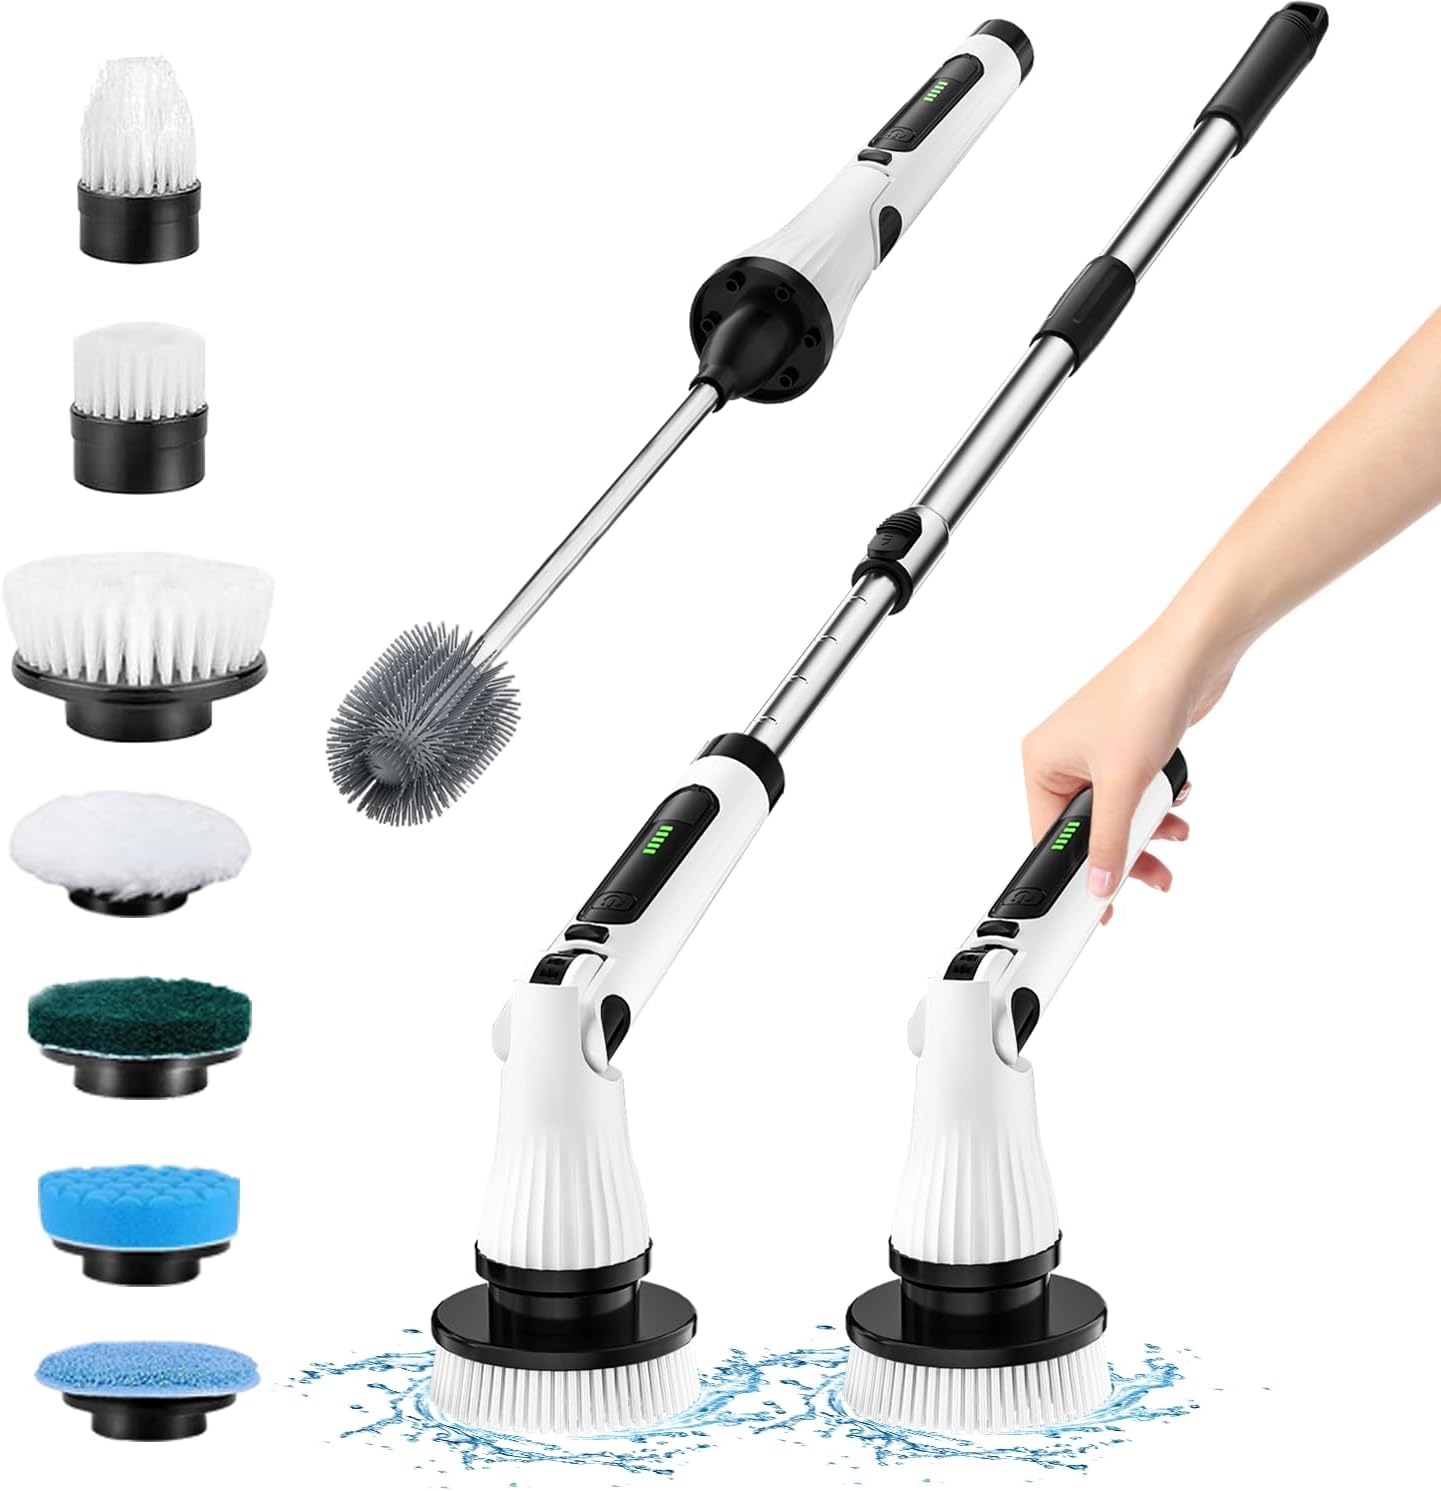  All Purpose Sonic Scrubber Power Cleaner Interchangeable  Brushes : Health & Household